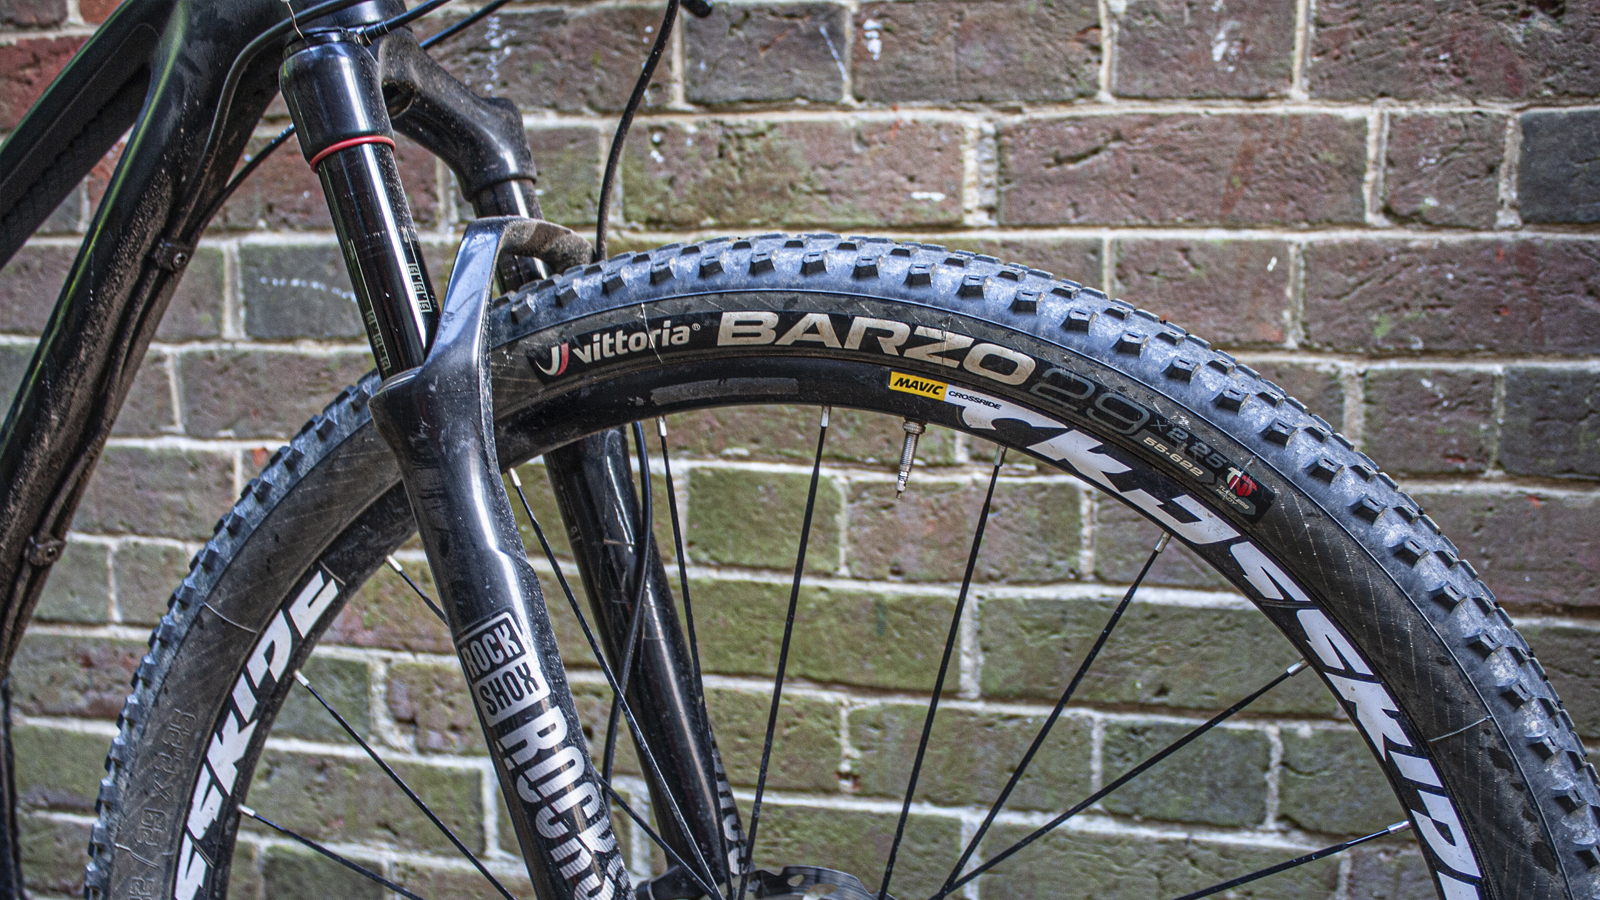 Vittoria Barzo tire review - the most complete XC tire available